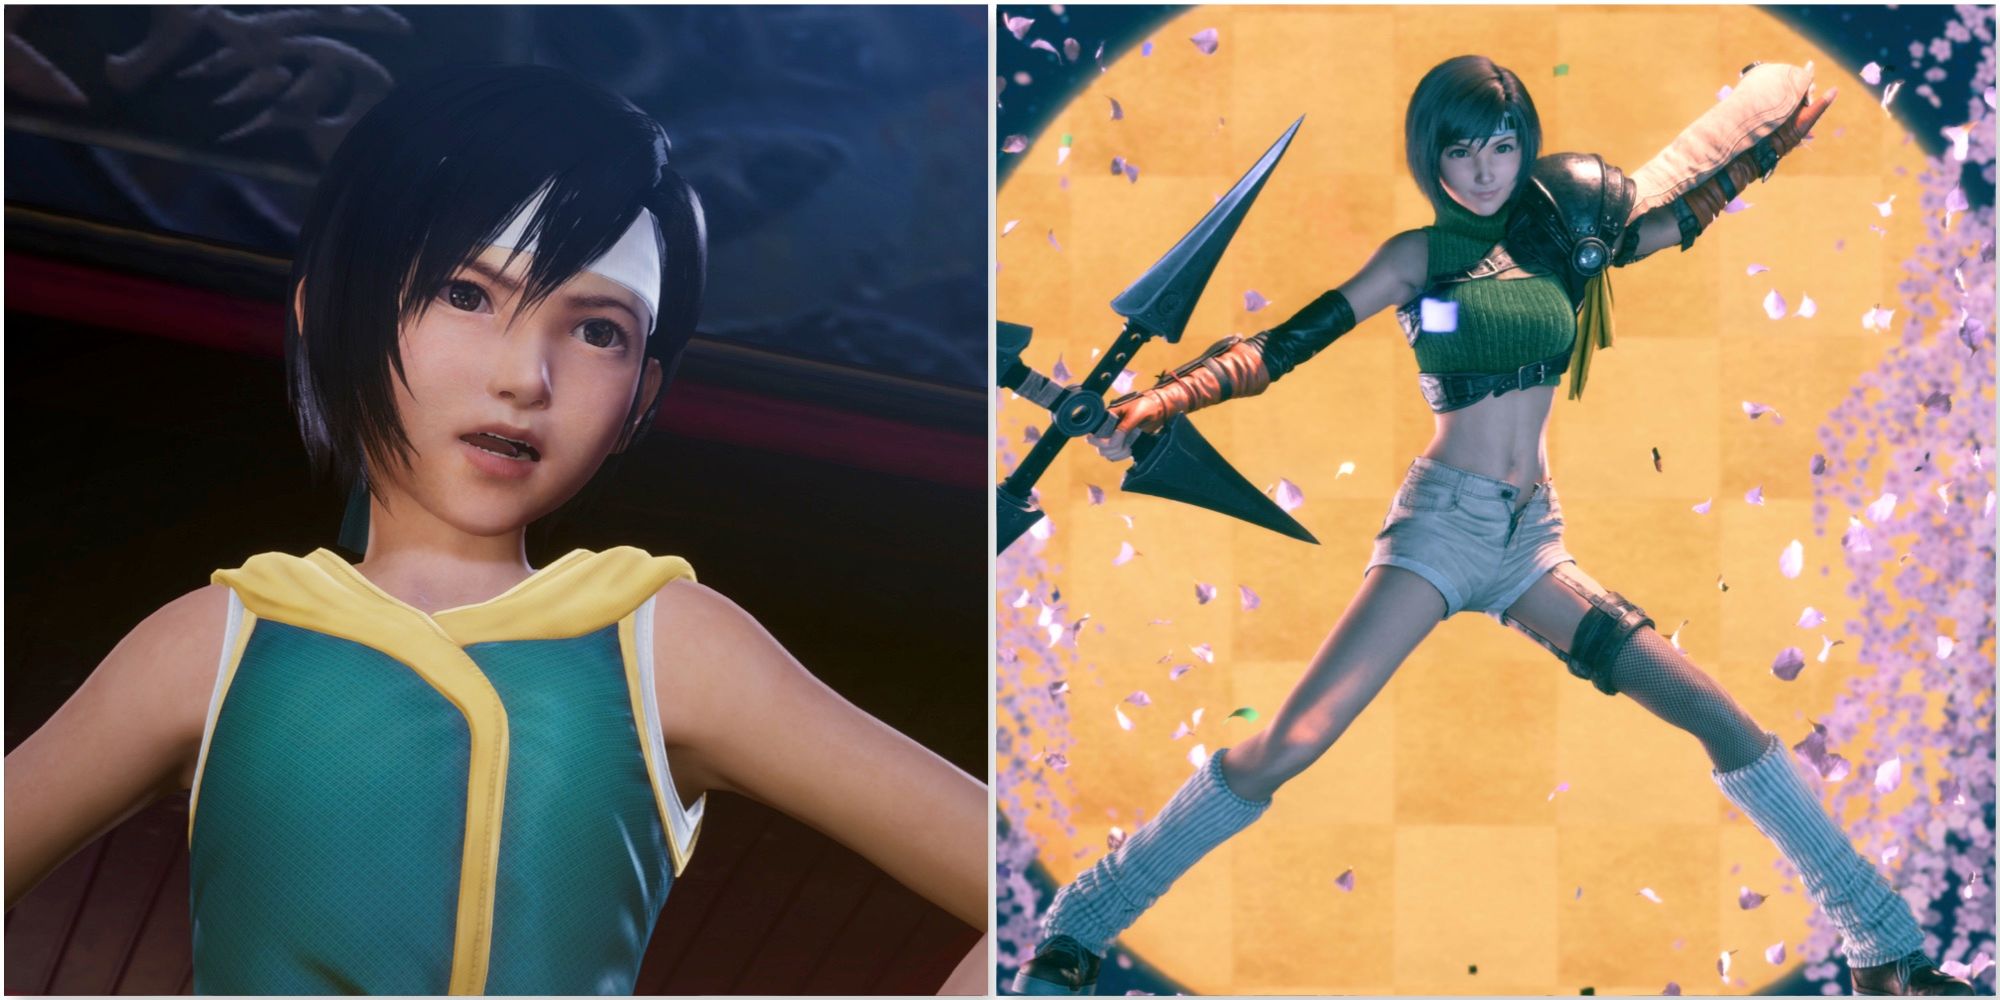 Yuffie in Crisis Core Final Fantasy 7 and Yuffie posing in Final Fantasy 7 Remake